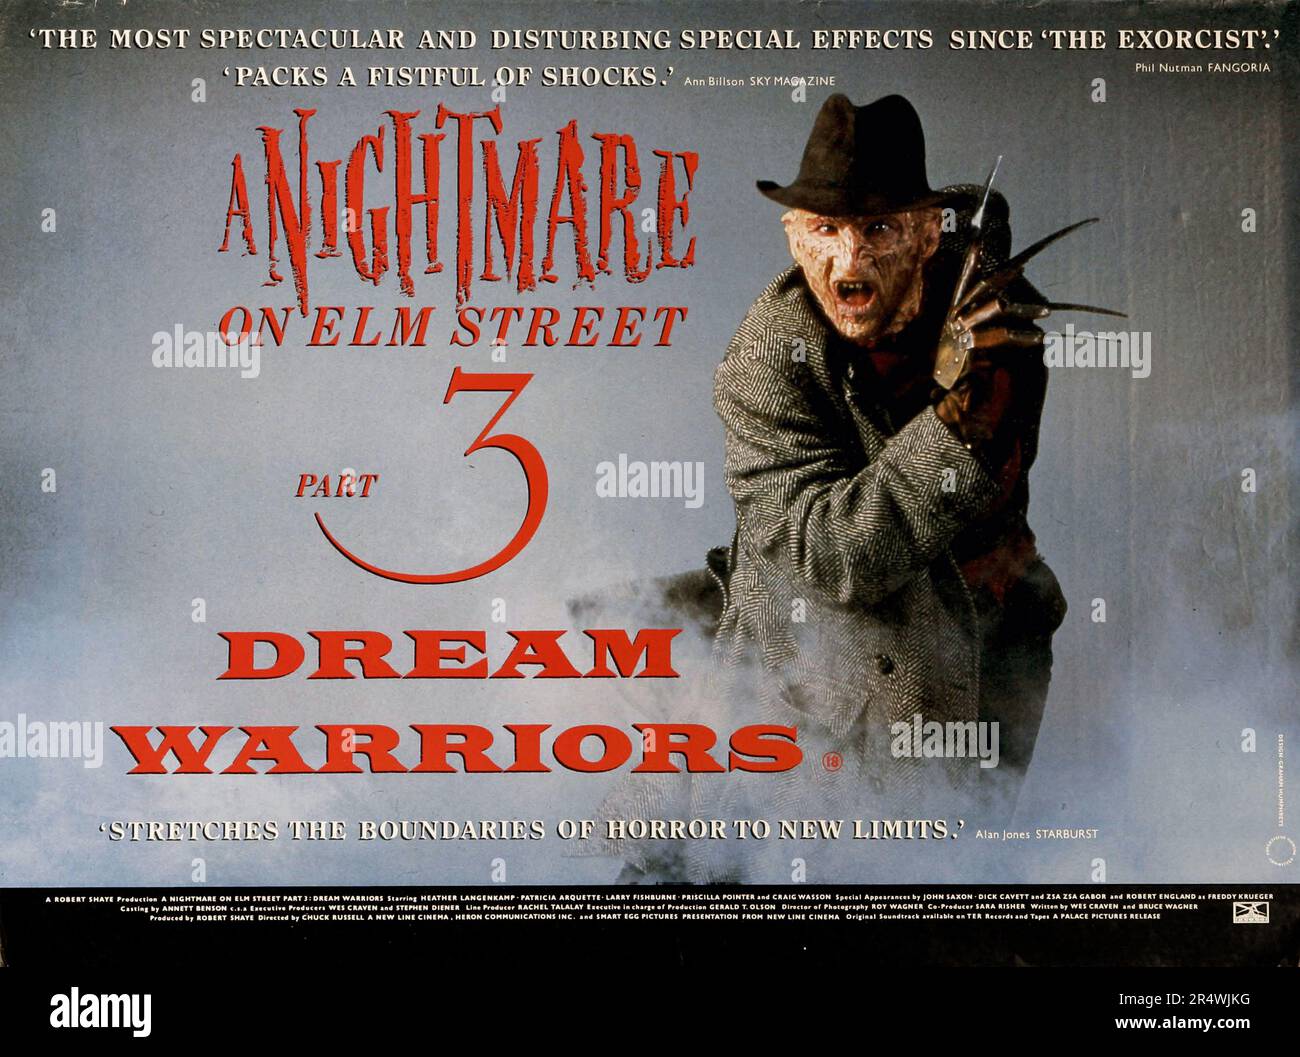 A Nightmare on Elm Street 3: Dream Warriors is a 1987 American slasher fantasy film and the third film in the Nightmare on Elm Street series. The film was directed by Chuck Russell, written by original creator Wes Craven and starred Craig Wasson, Heather Langenkamp and Robert Englund. It is the sequel to A Nightmare on Elm Street 2: Freddy's Revenge. Stock Photo